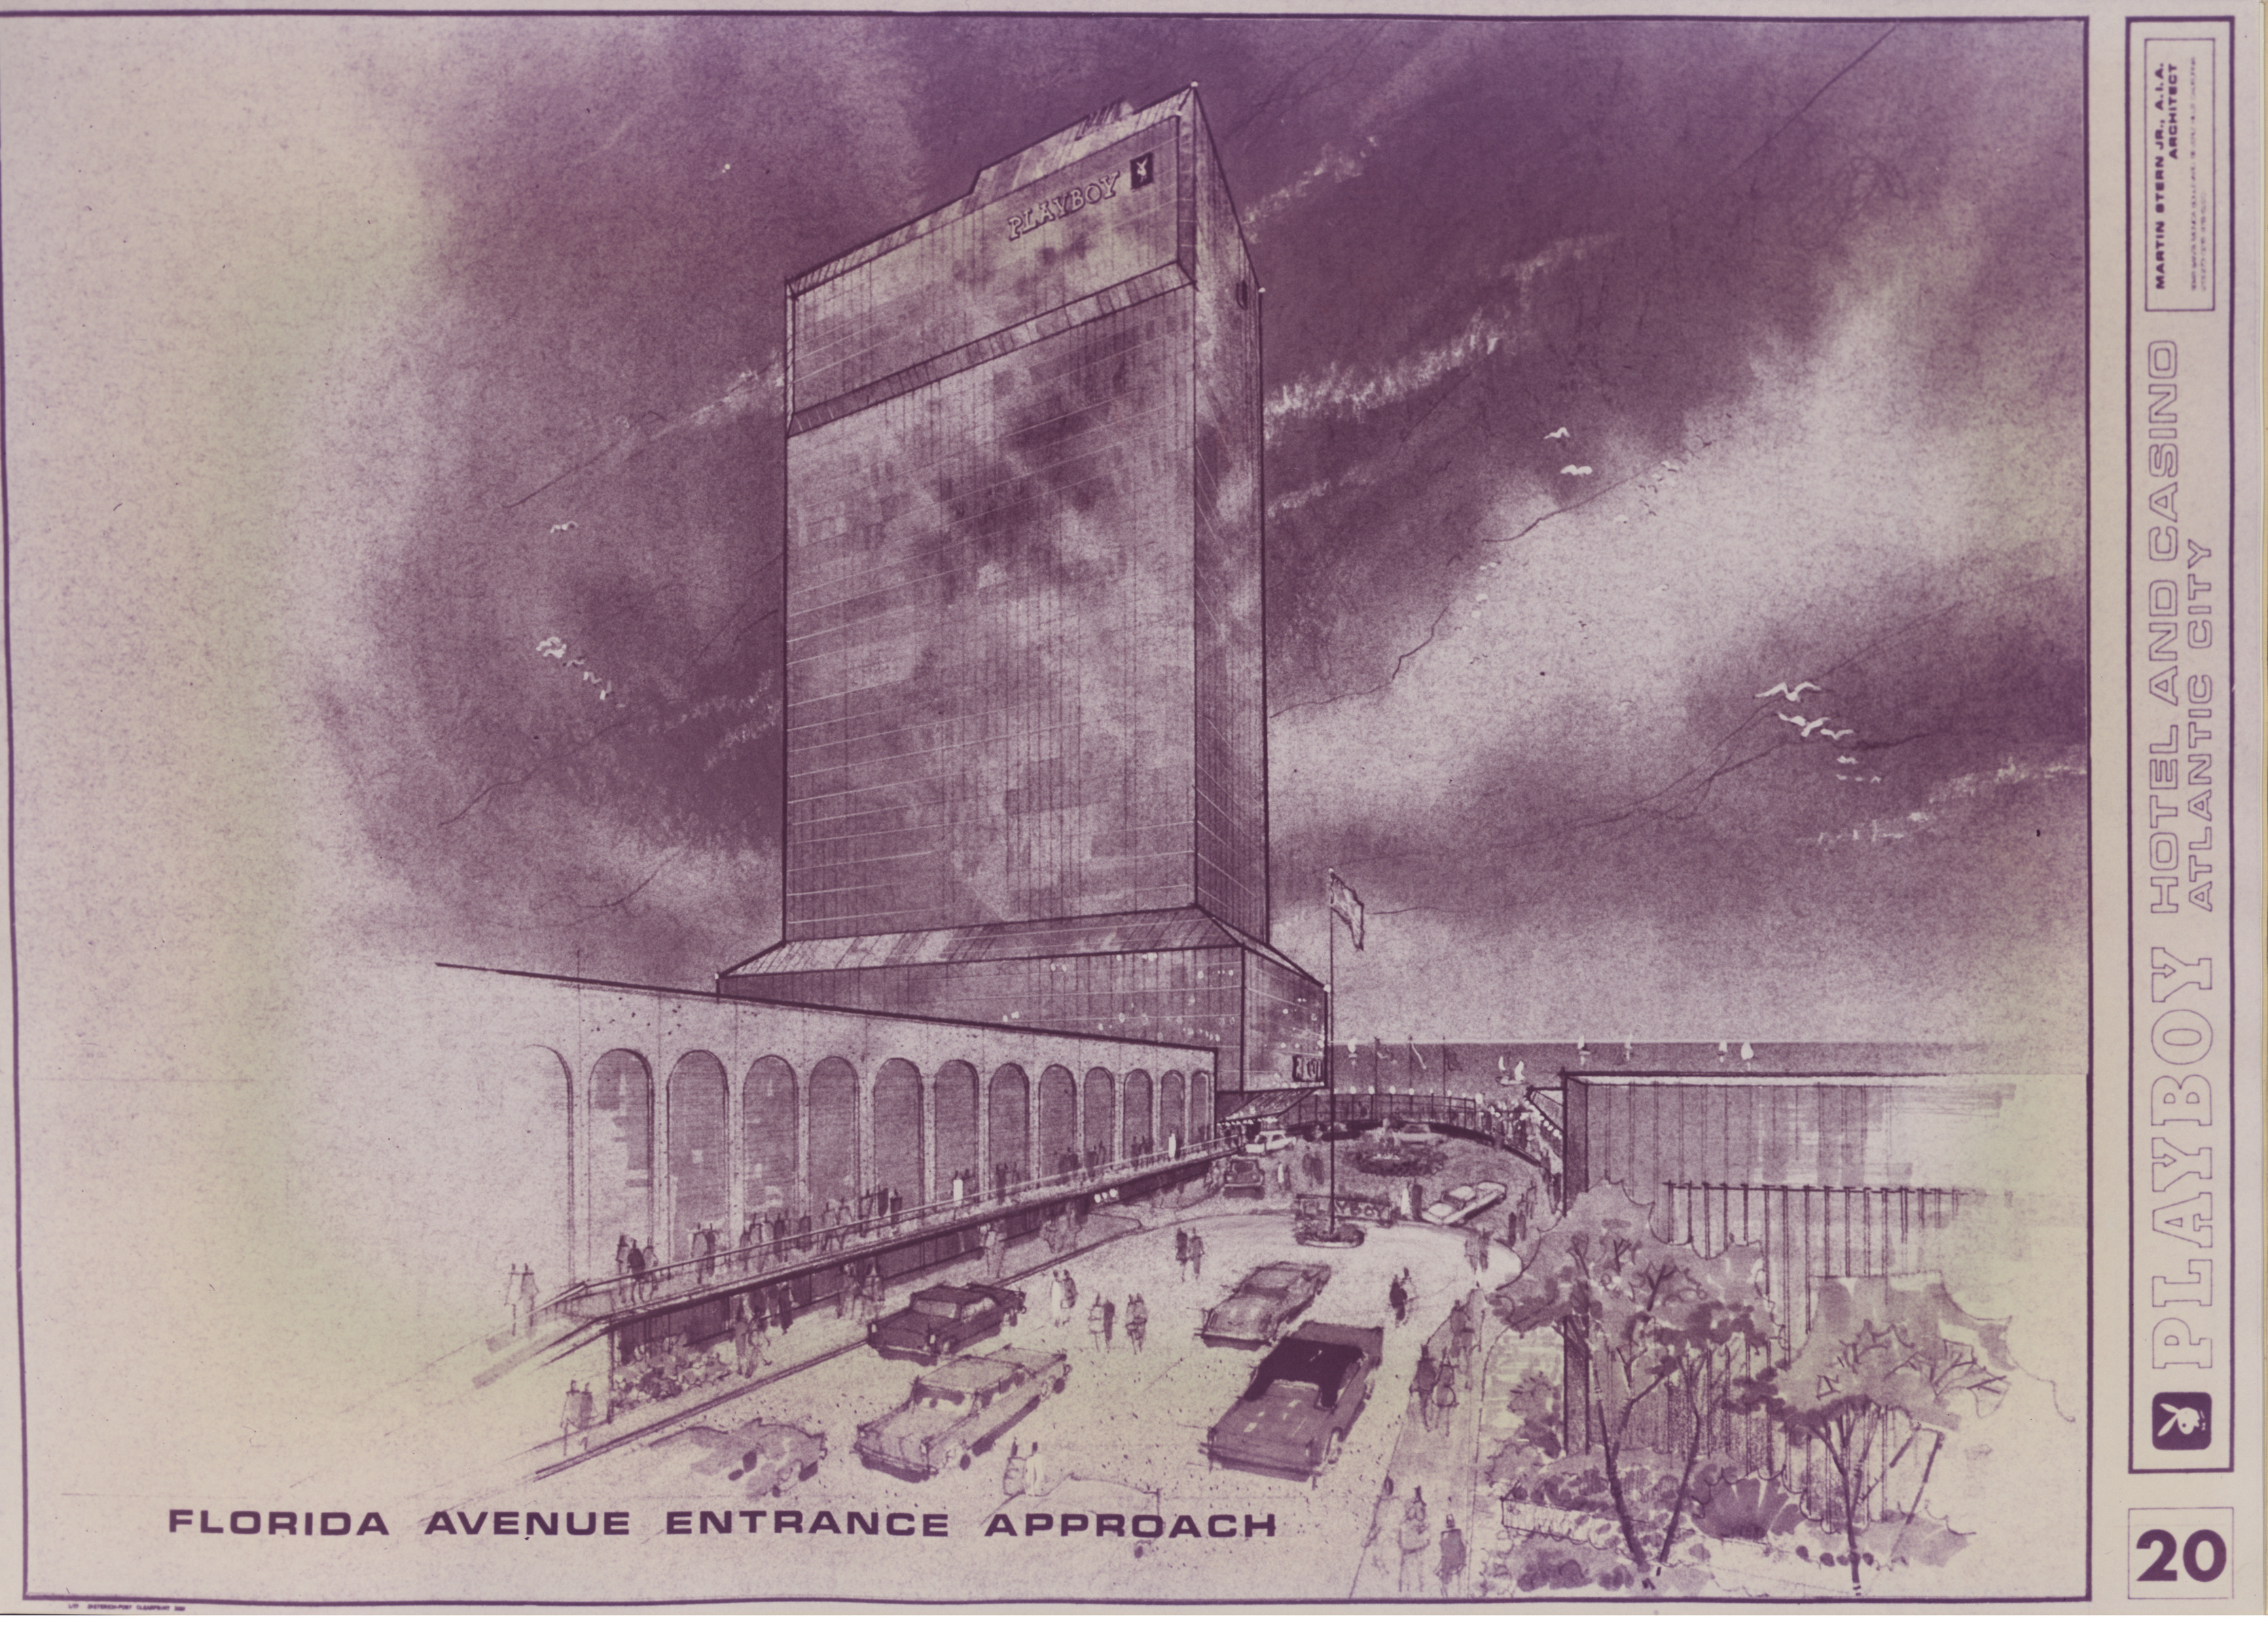 Playboy Hotel and Casino Proposal, image 20